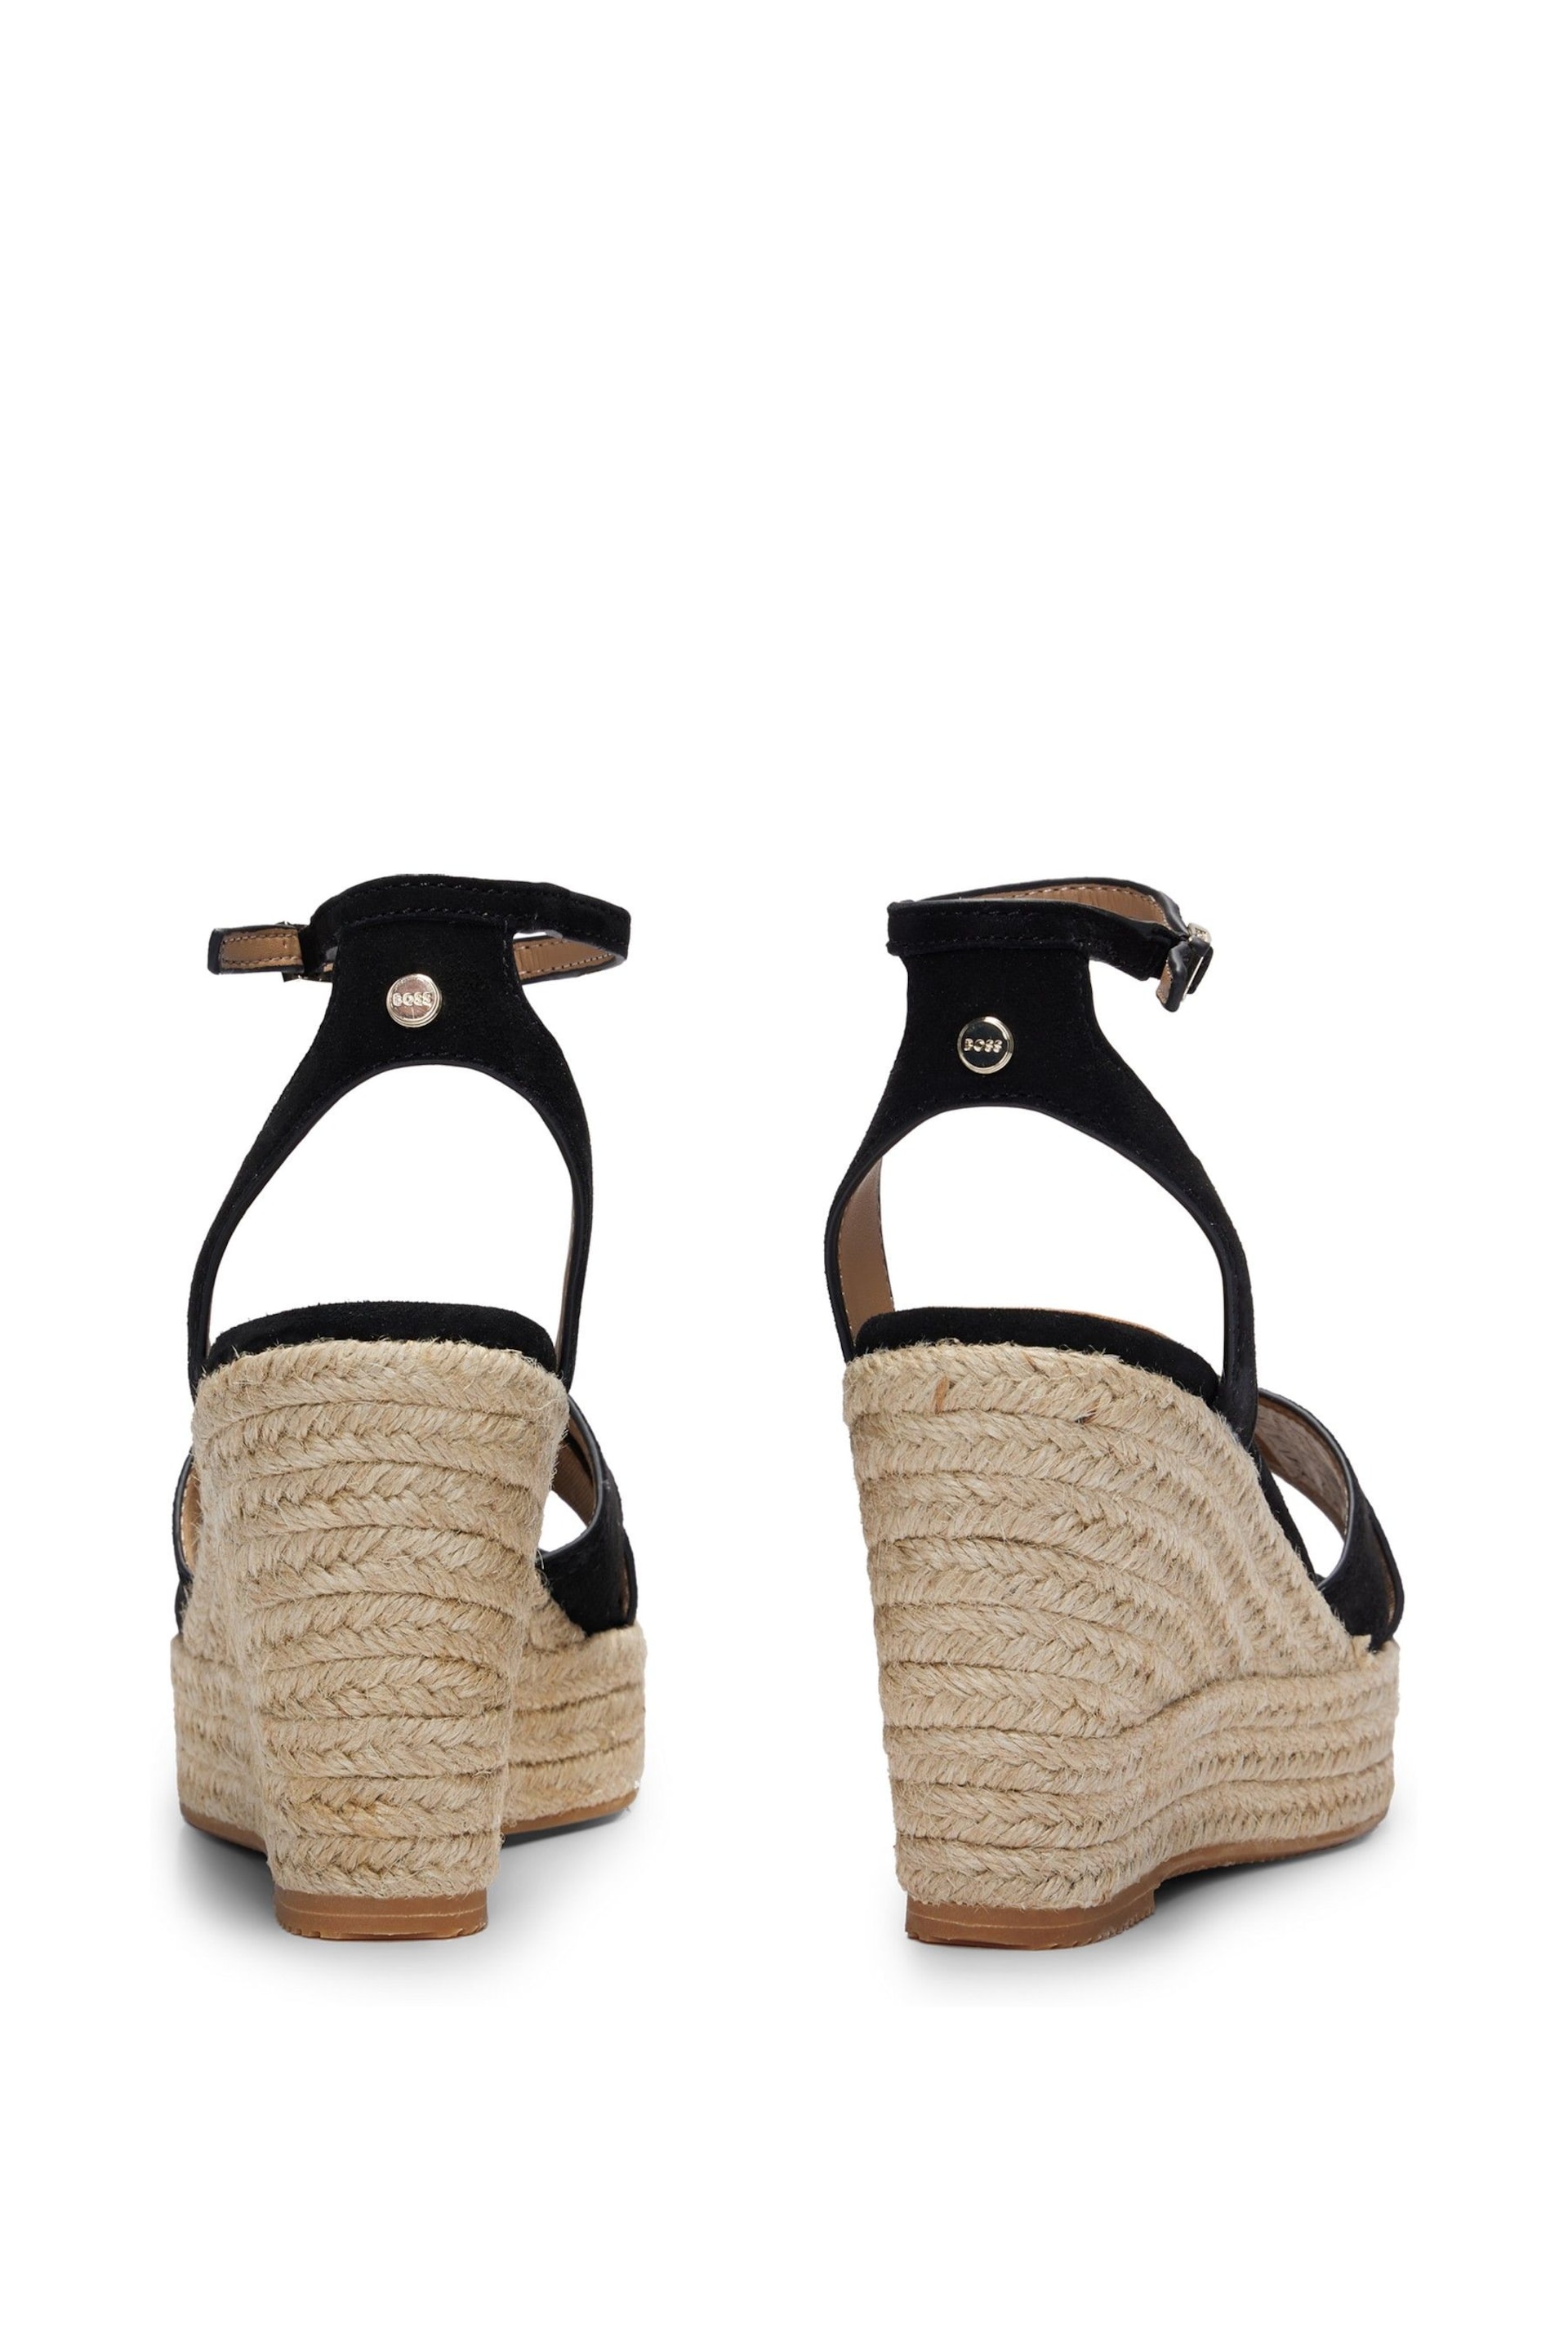 BOSS Black Suede Wedge Sandals With Ankle Strap - Image 3 of 4